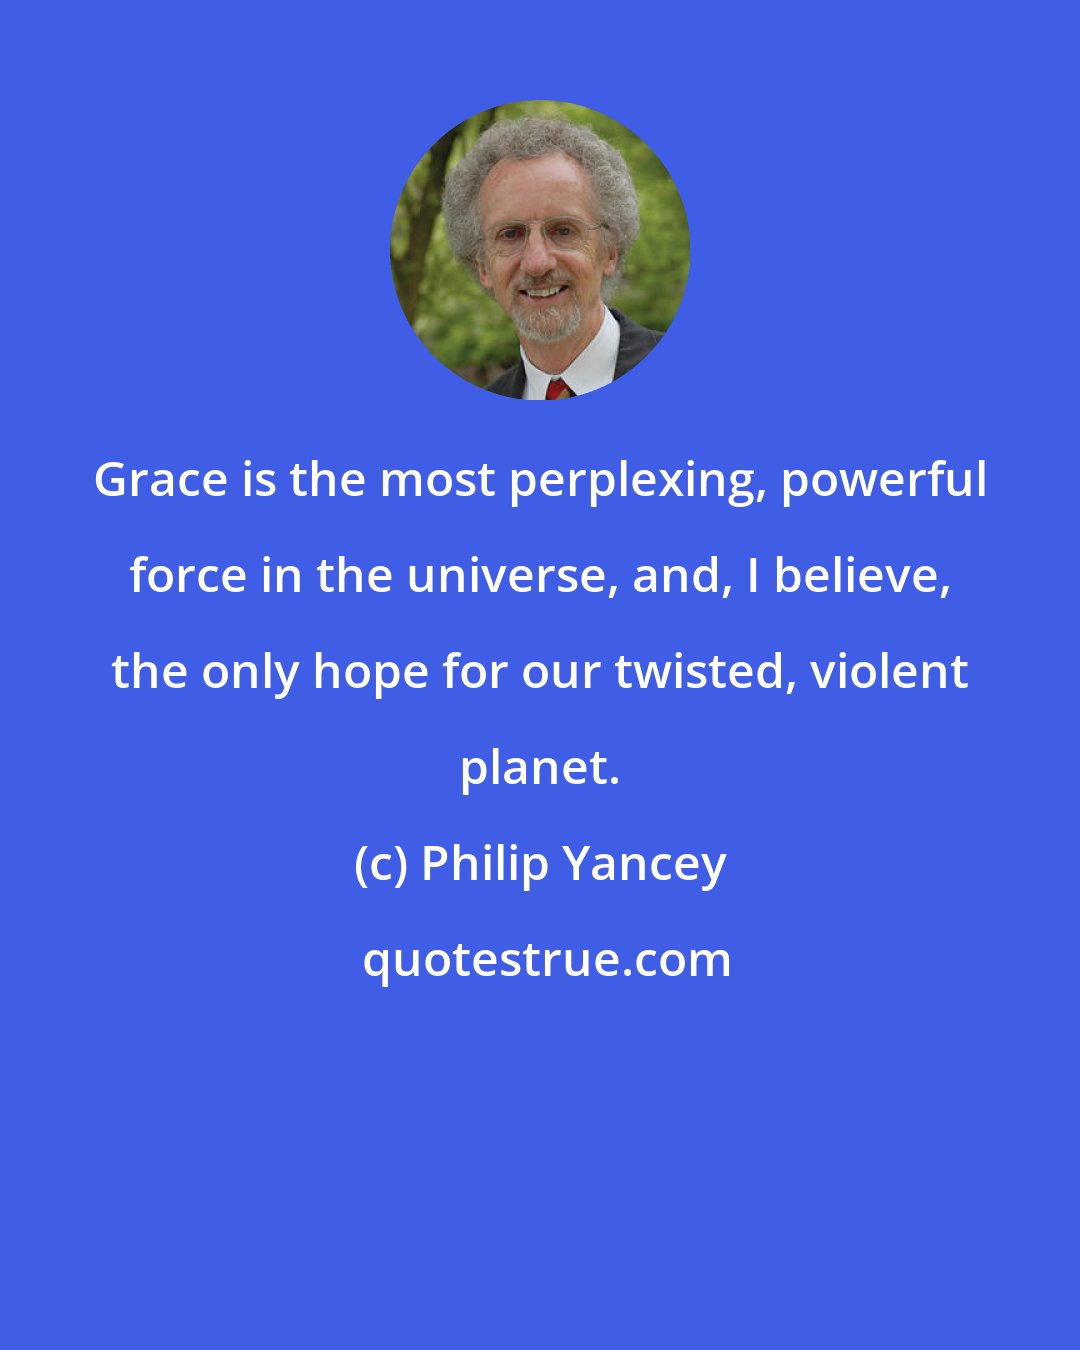 Philip Yancey: Grace is the most perplexing, powerful force in the universe, and, I believe, the only hope for our twisted, violent planet.